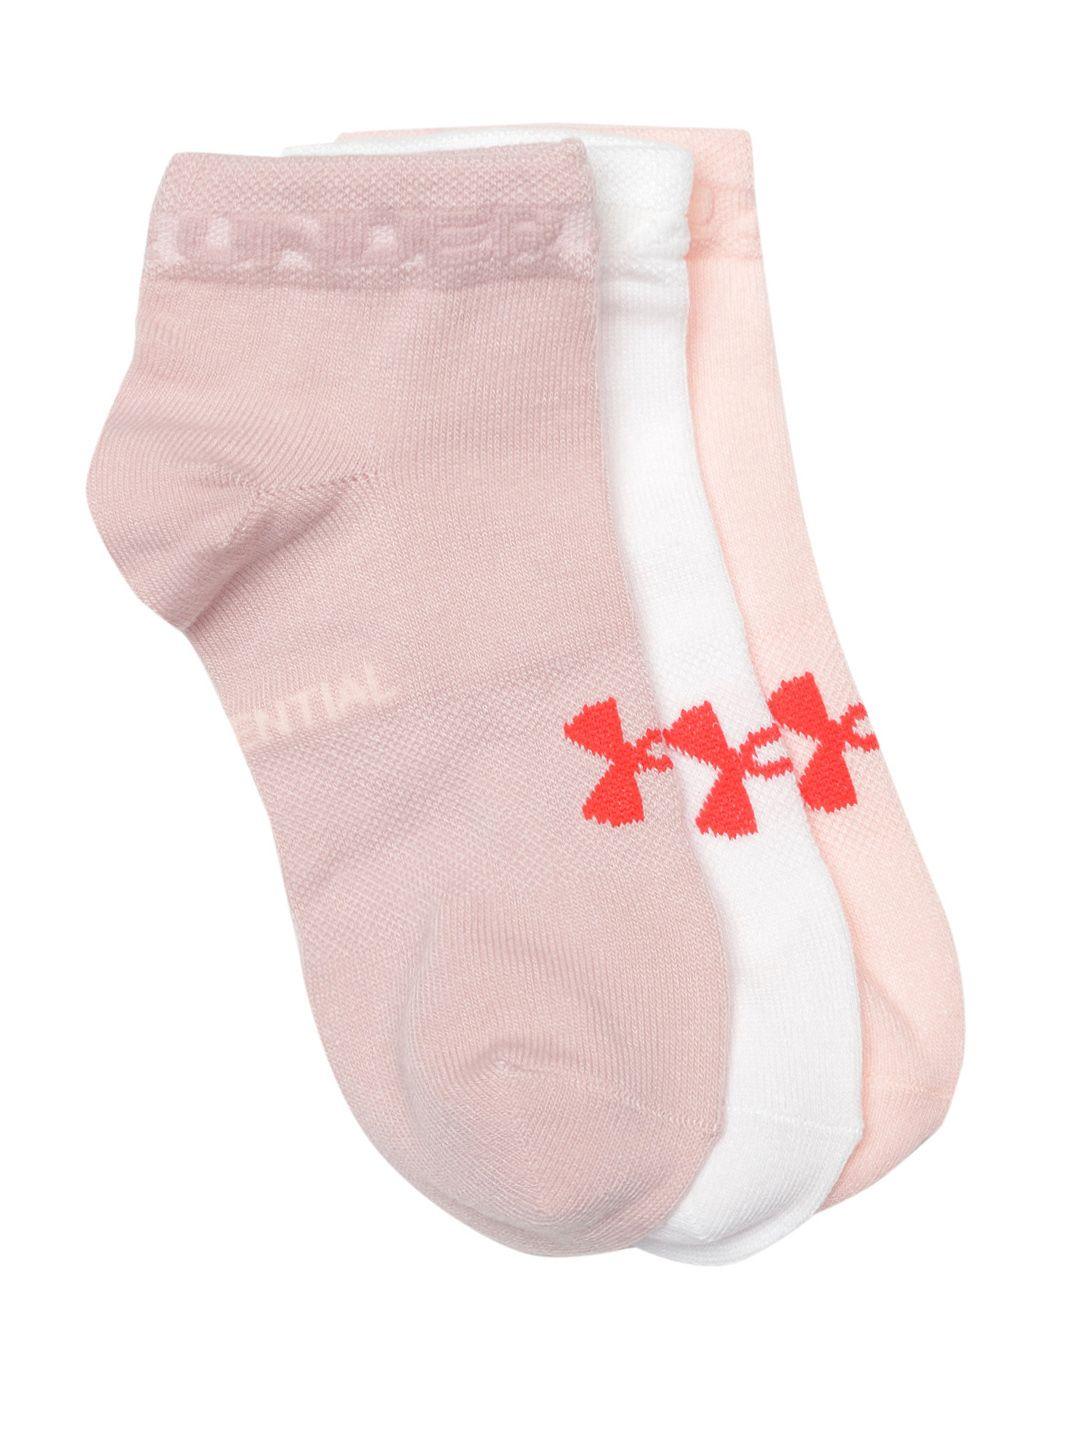 under armour unisex pack of 3 brand logo patterned essential low cut ankle length socks